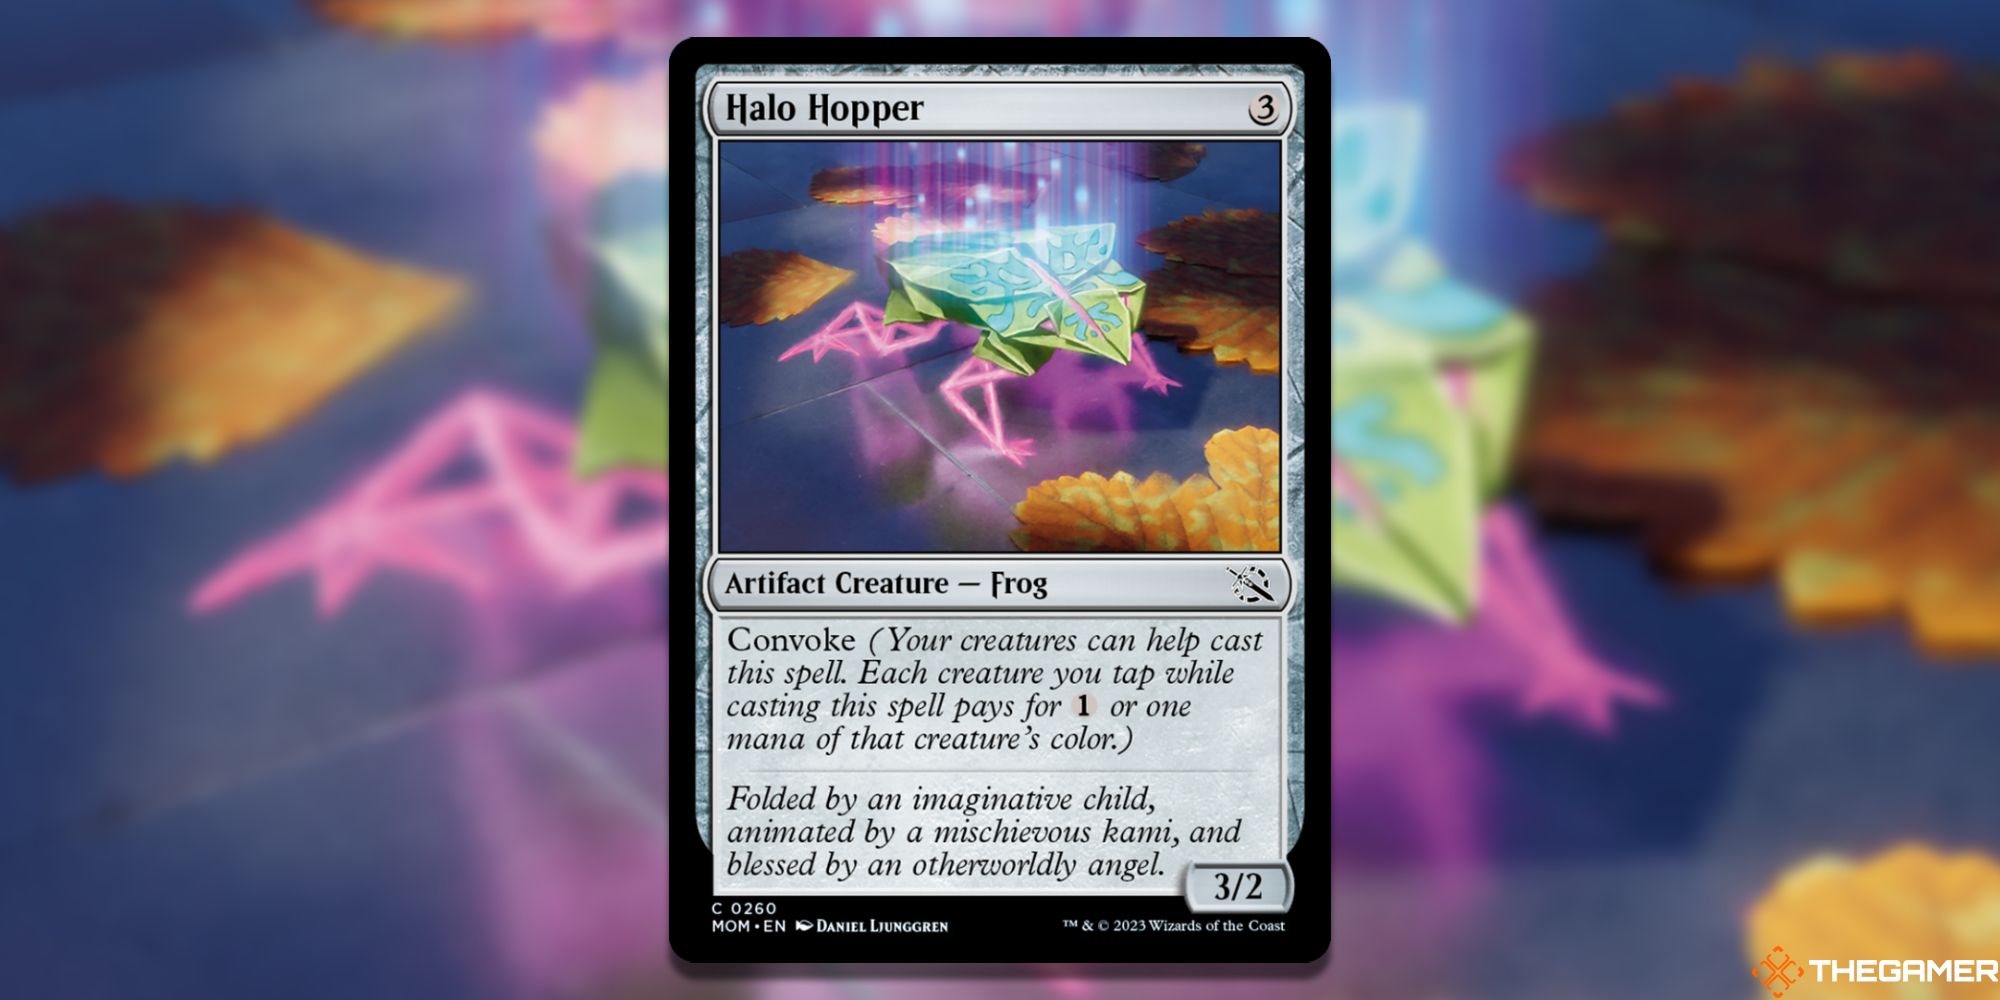 Halo Hopper card image from Magic: The Gathering, with artwork by Daniel Ljunggren